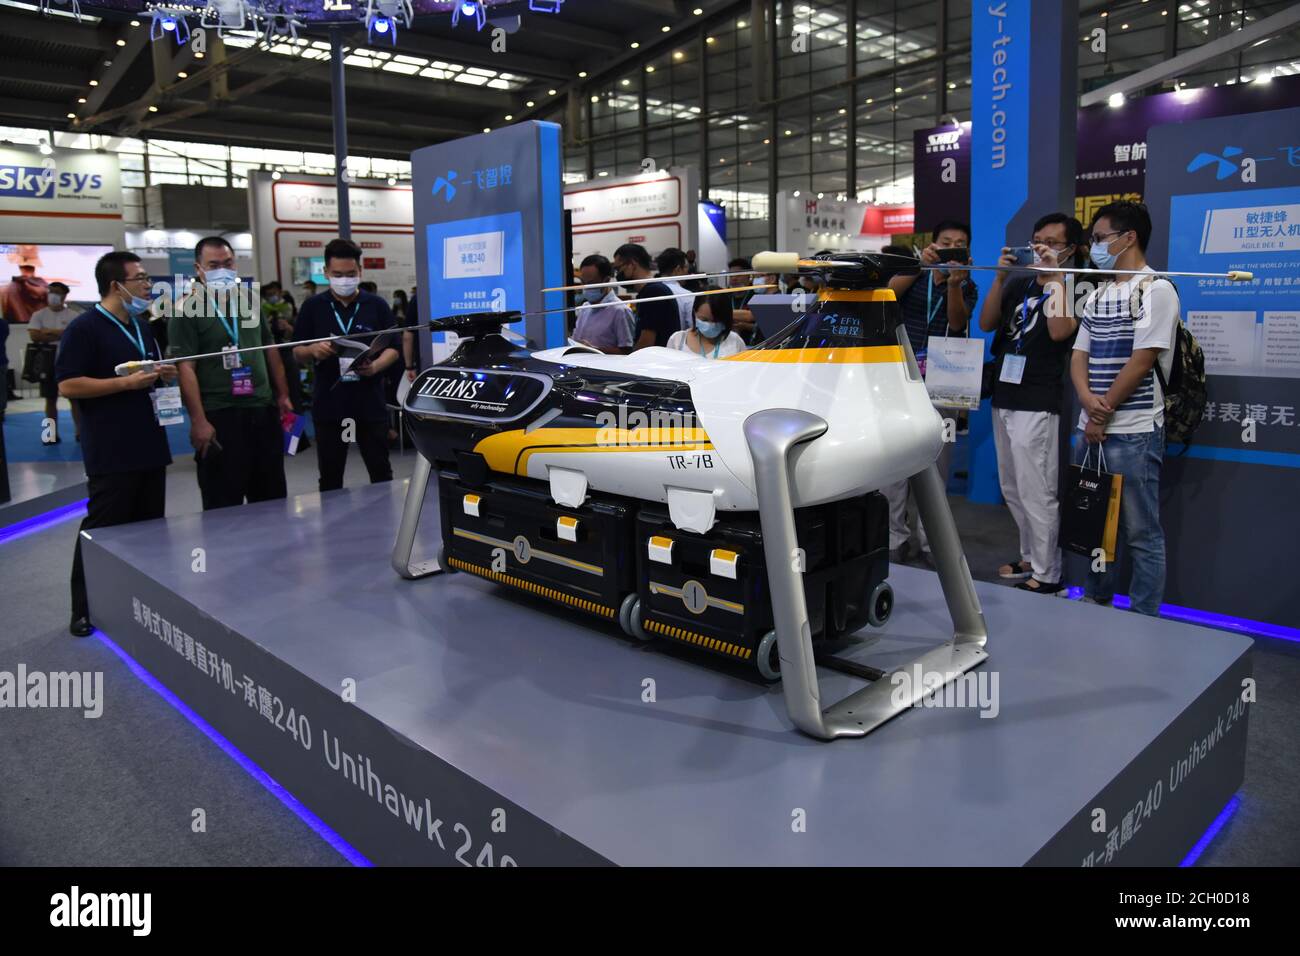 Shenzhen. 13th Sep, 2020. People visit the 5th Shenzhen International UAV  Expo in south China's Guangdong Province, Sept. 13, 2020. The Drone World  Congress 2020 and the 5th Shenzhen International UAV Expo